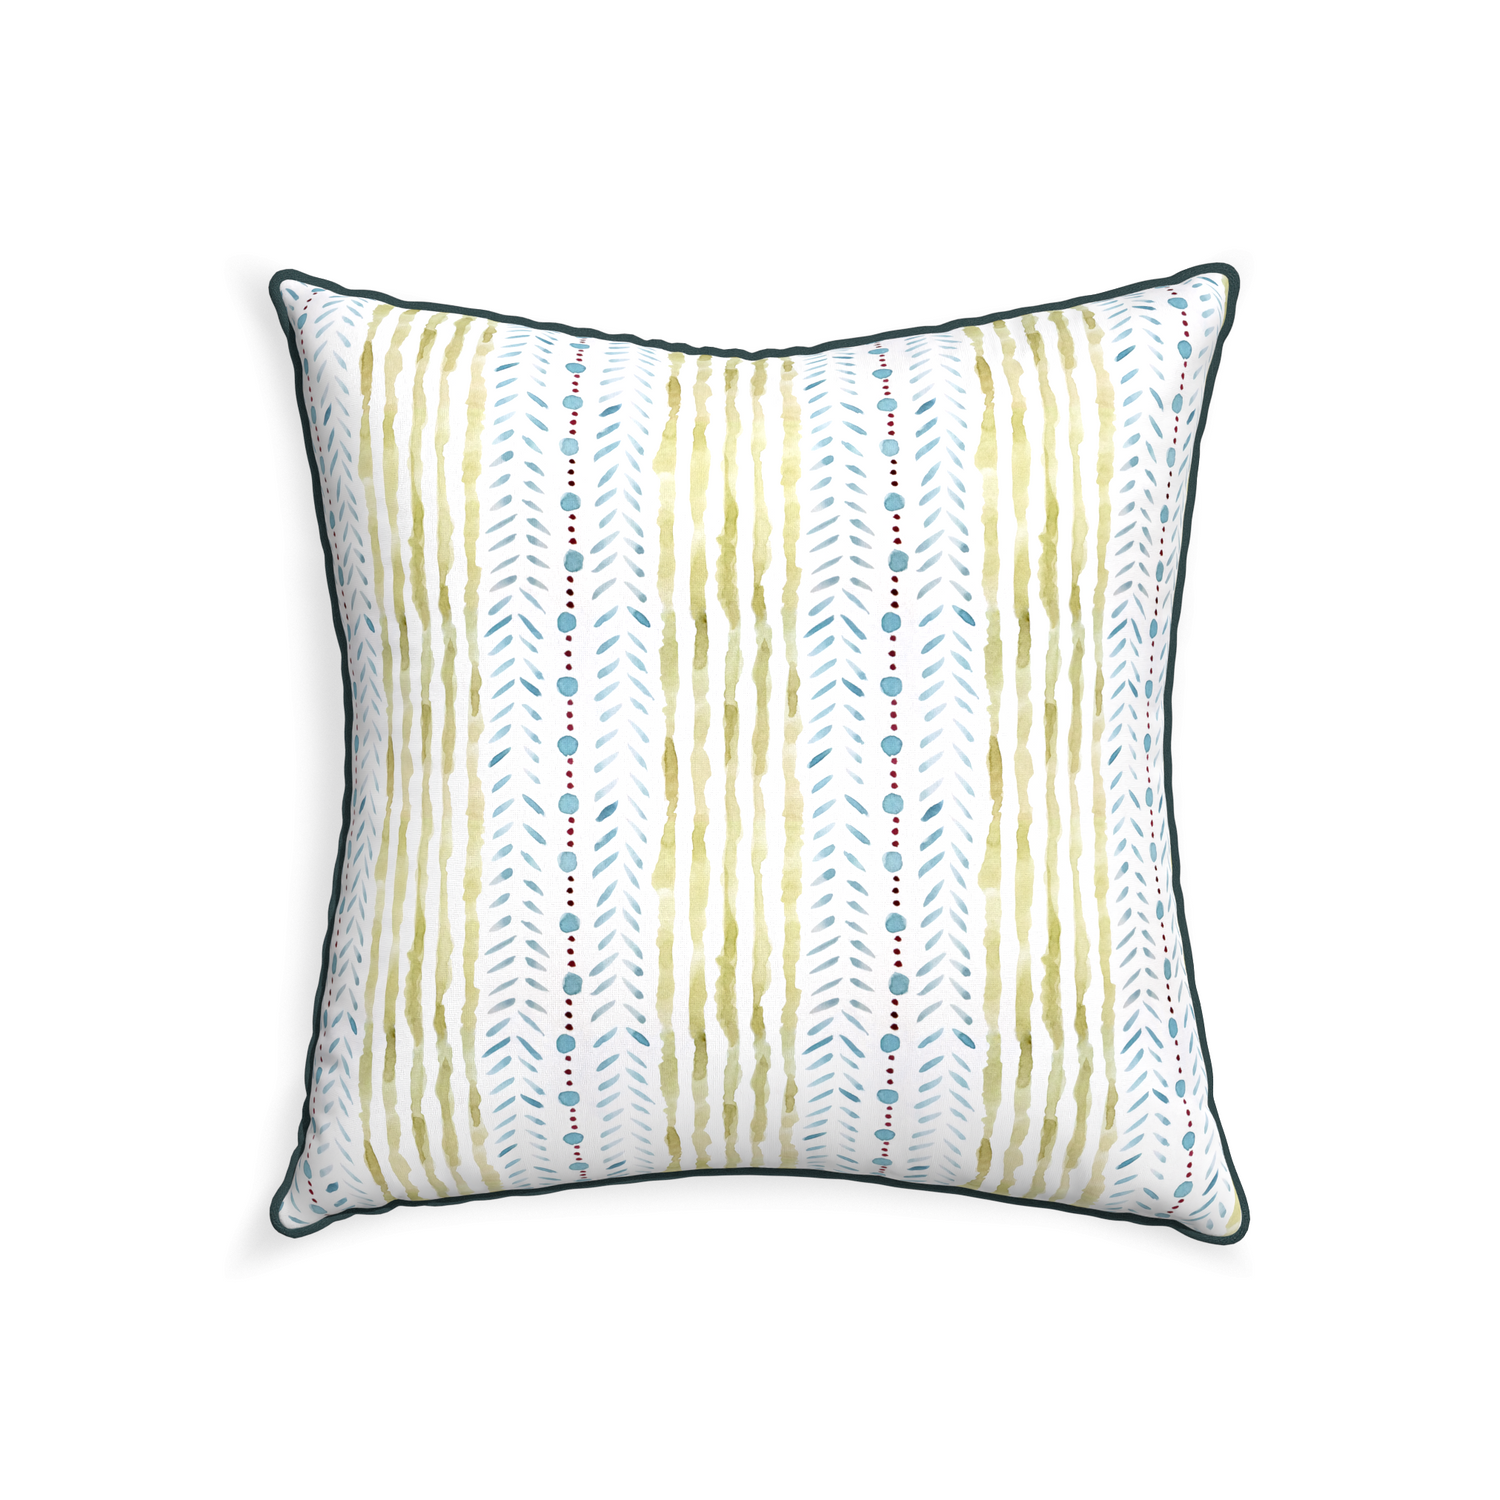 22-square julia custom blue & green stripedpillow with p piping on white background